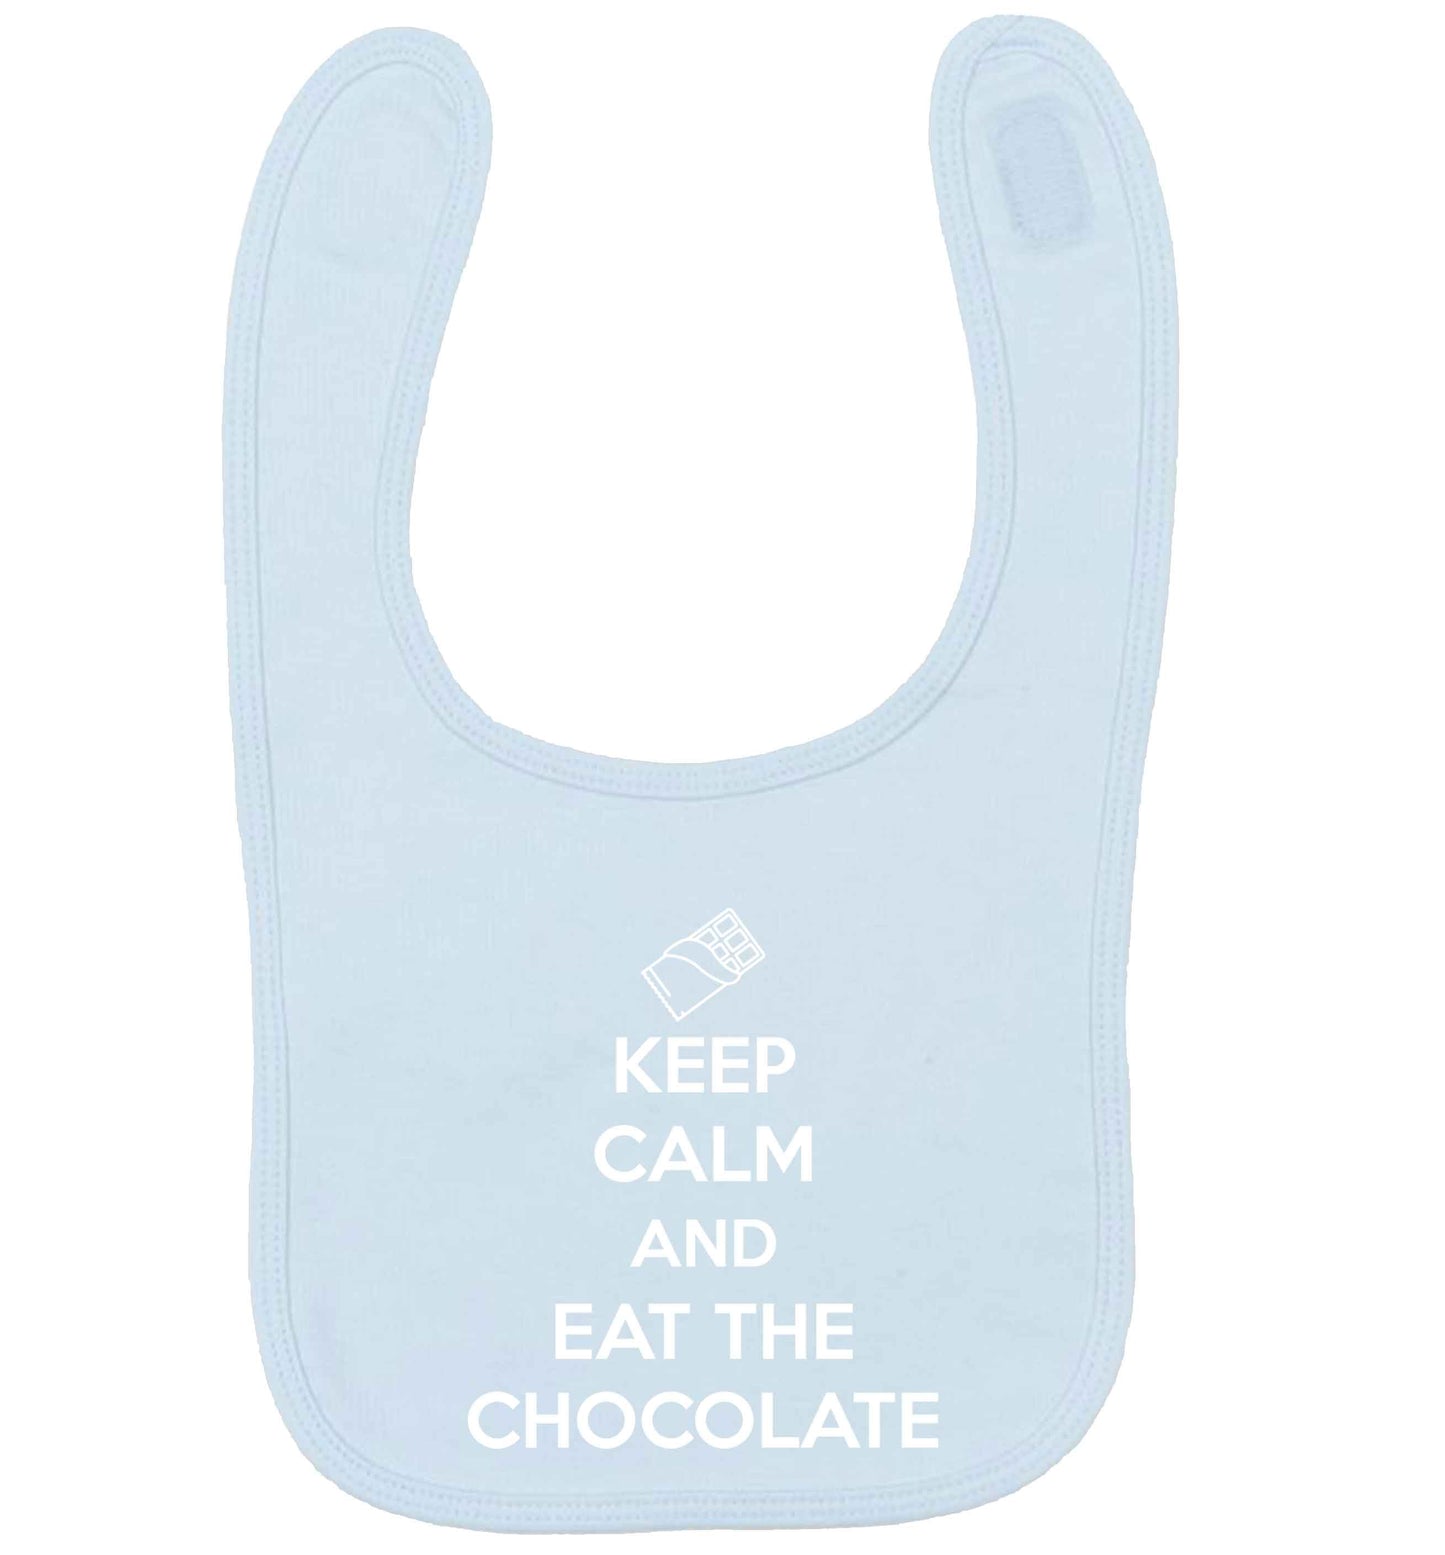 funny gift for a chocaholic! Keep calm and eat the chocolate pale blue baby bib